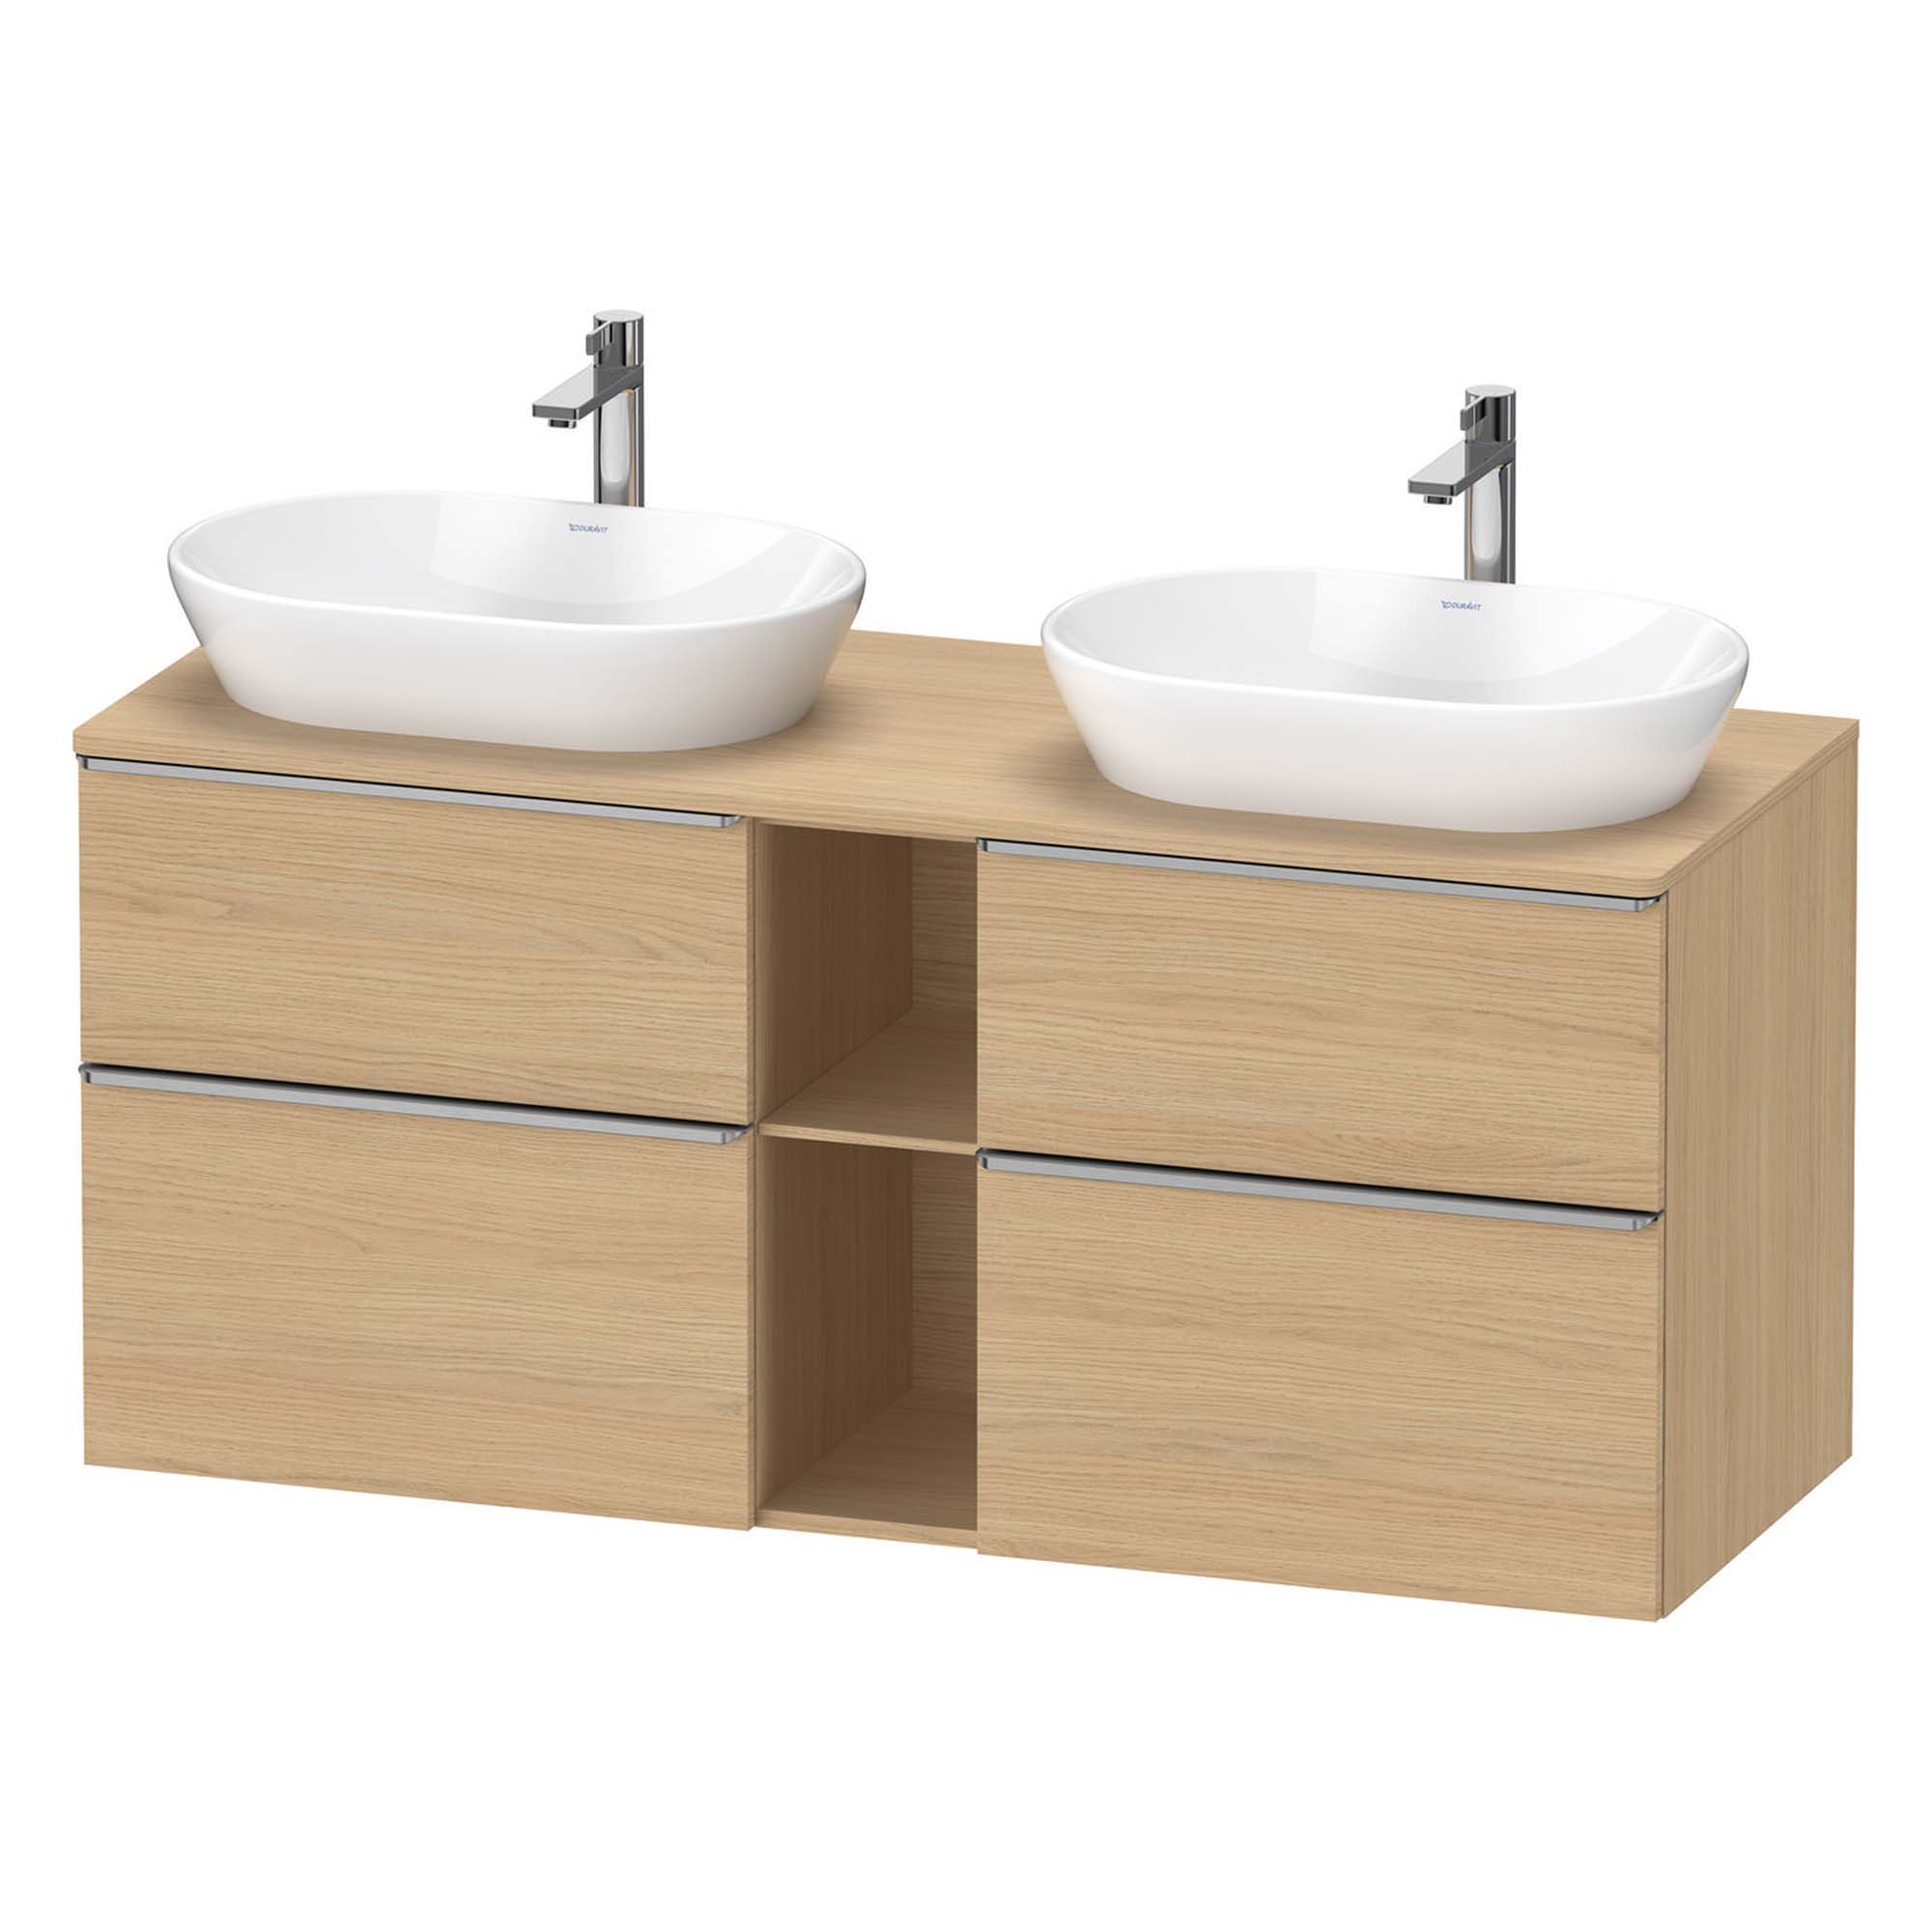 duravit d-neo 1400 wall mounted vanity unit with worktop 2 open shelves natural oak stainless steel handles